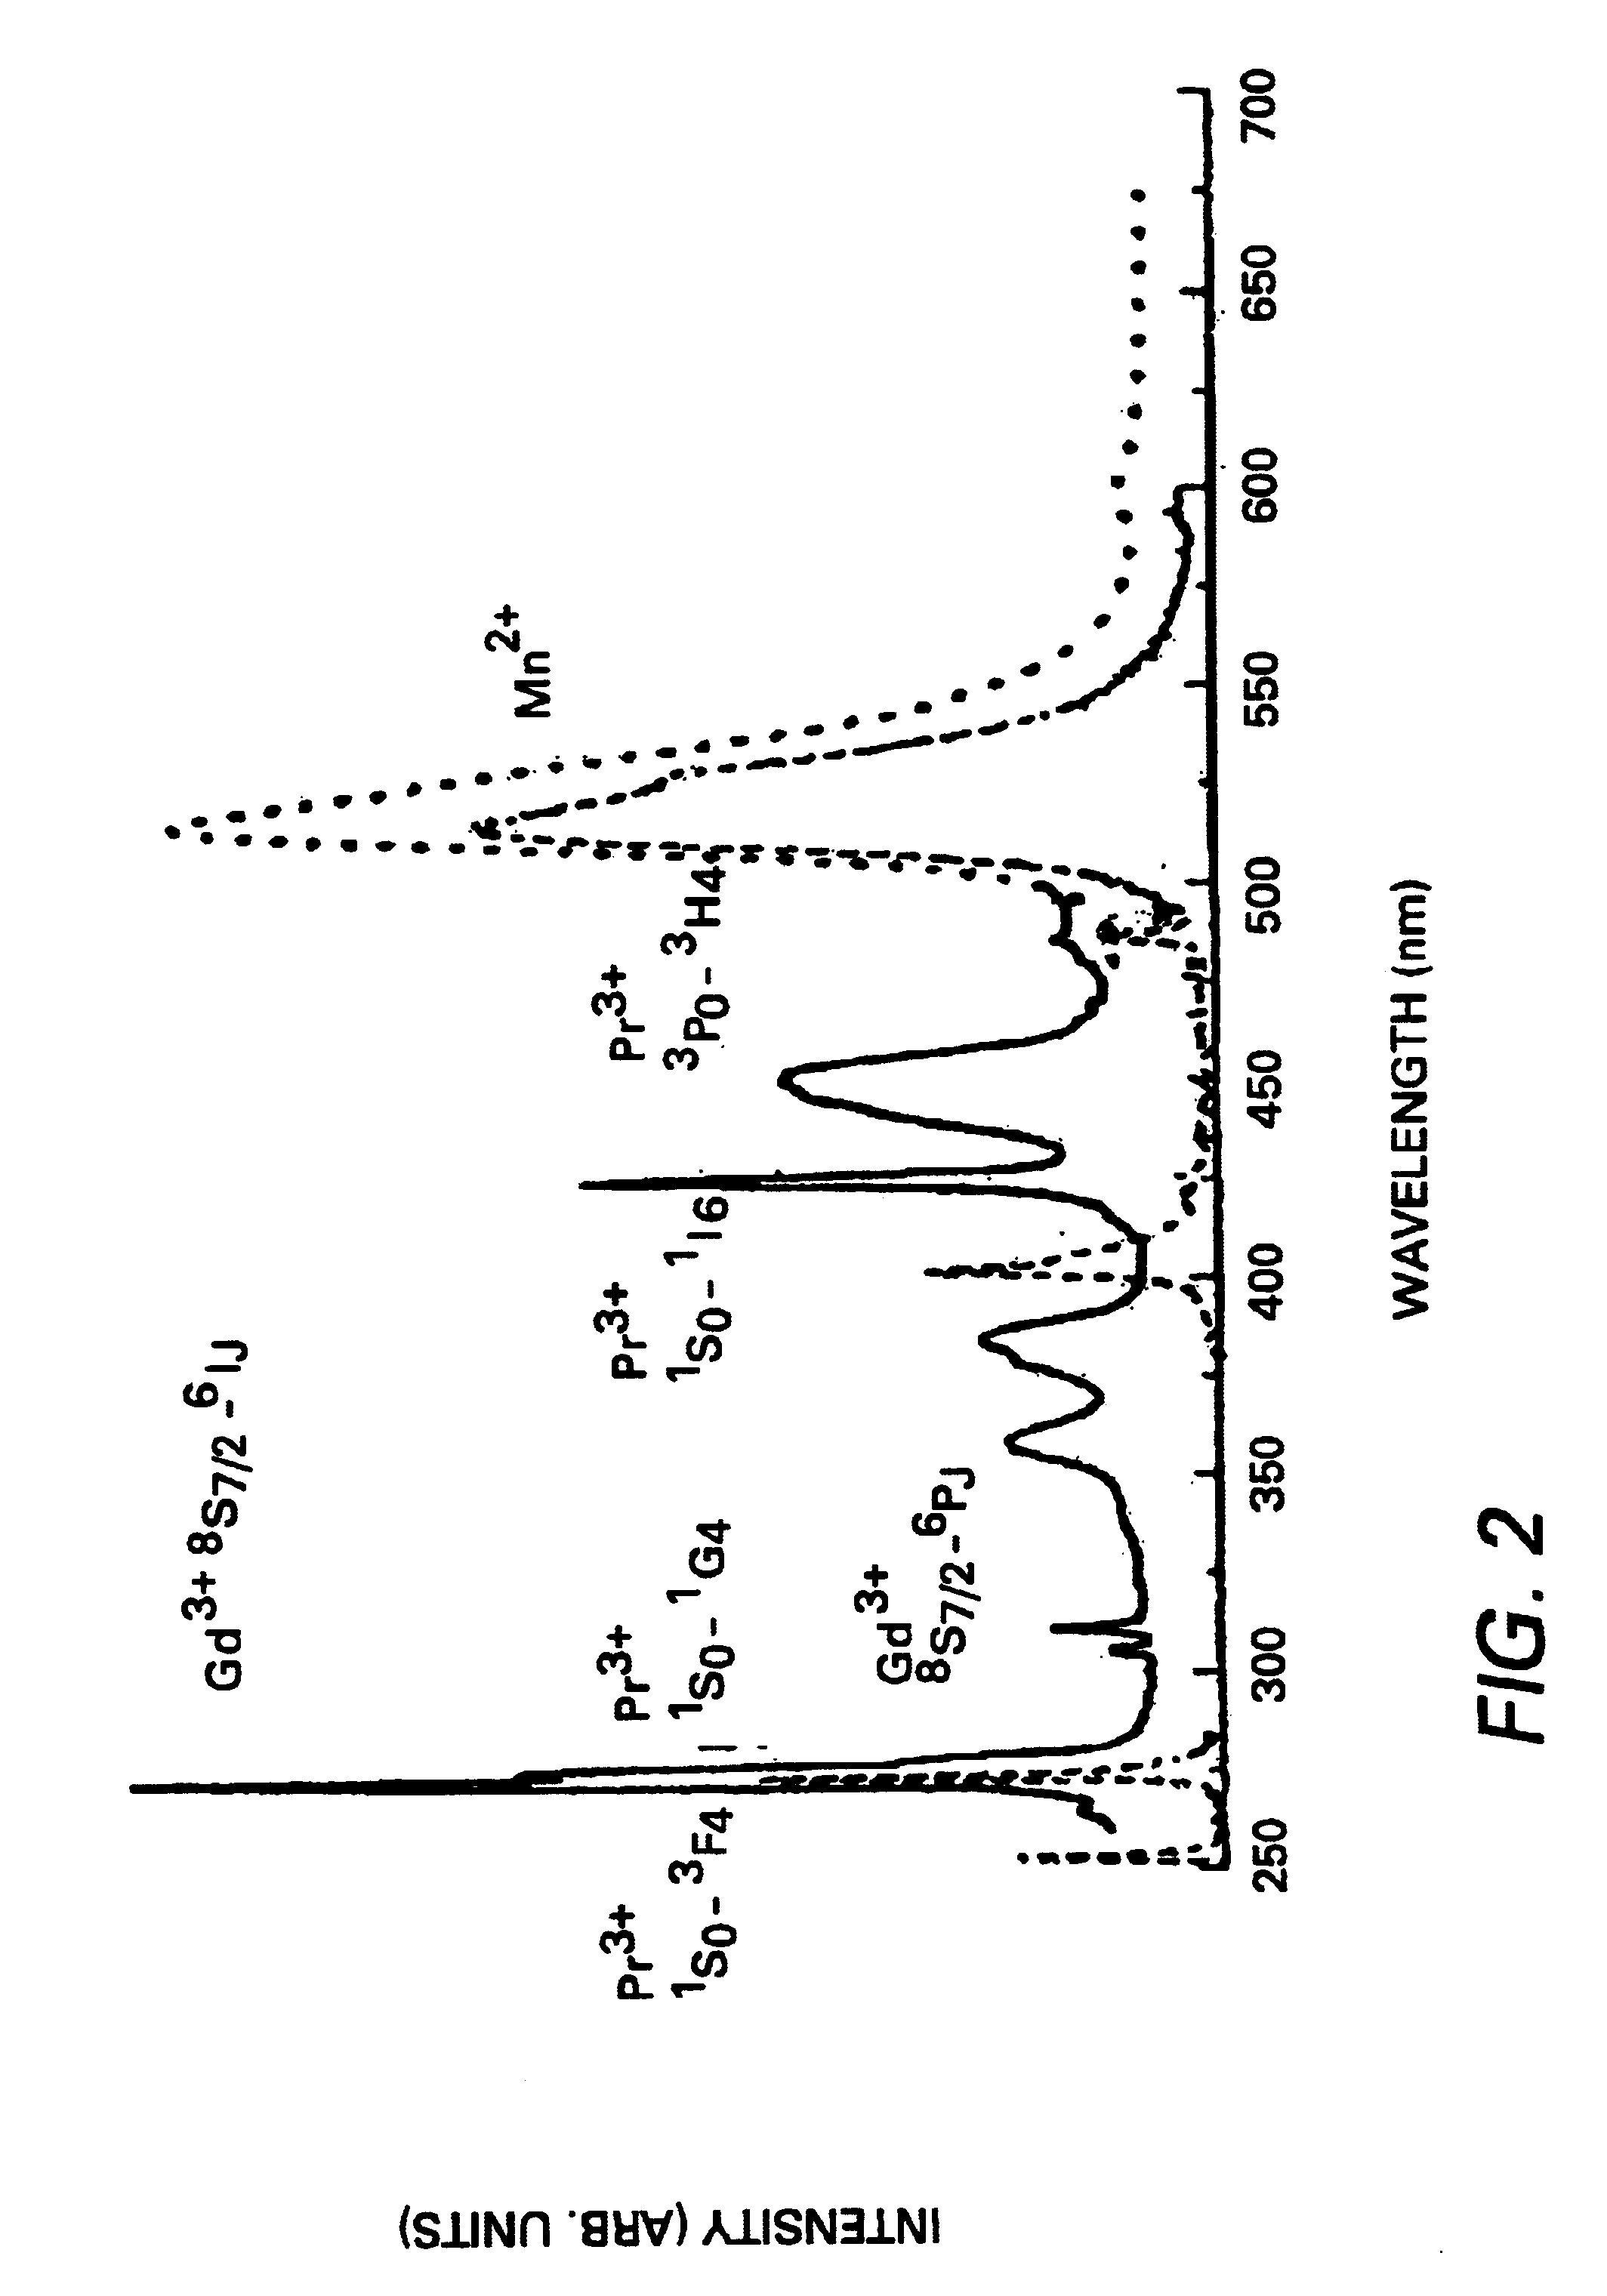 Quantum-splitting oxide-based phosphors, method of producing, and rules for designing the same